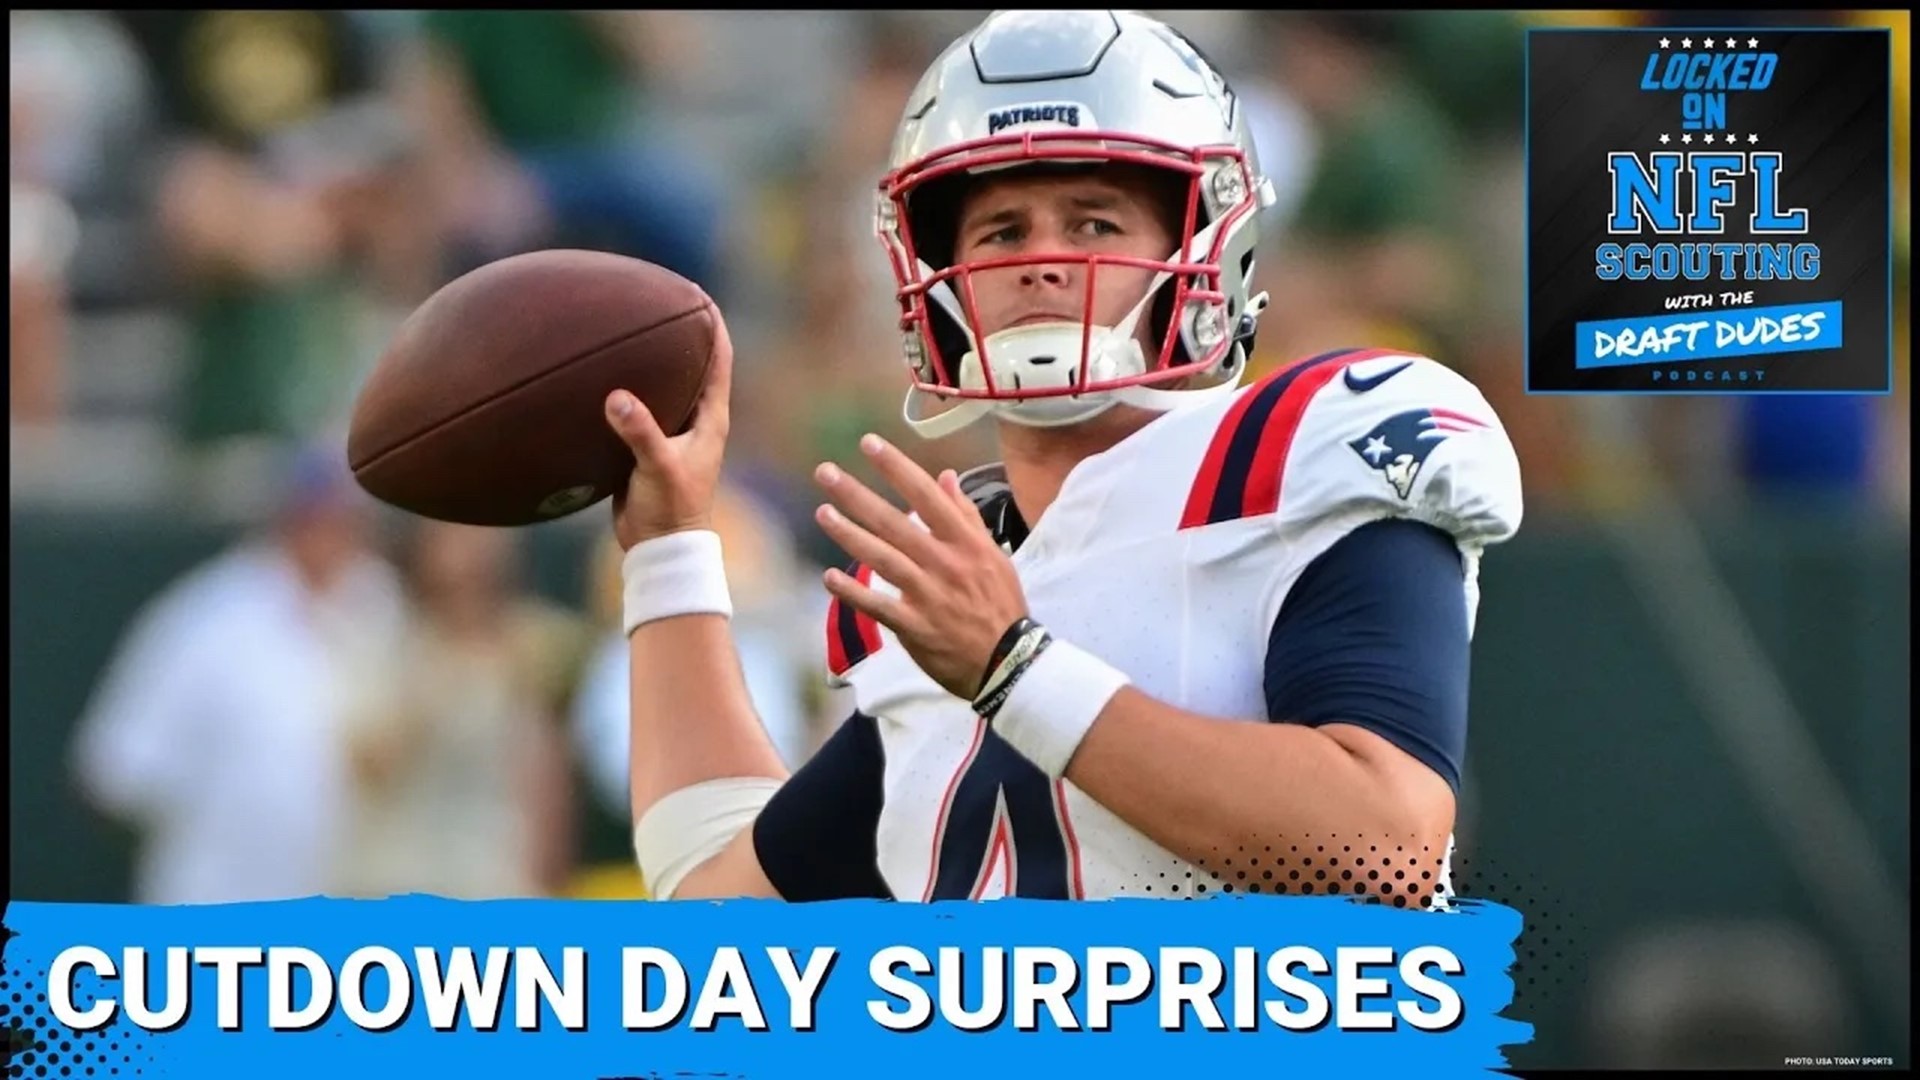 The NFL cutdown day has come and gone with plenty of surprises to break down. On today’s episode, Joe Marino and Kyle Crabbs reflect on a busy day across the NFL.